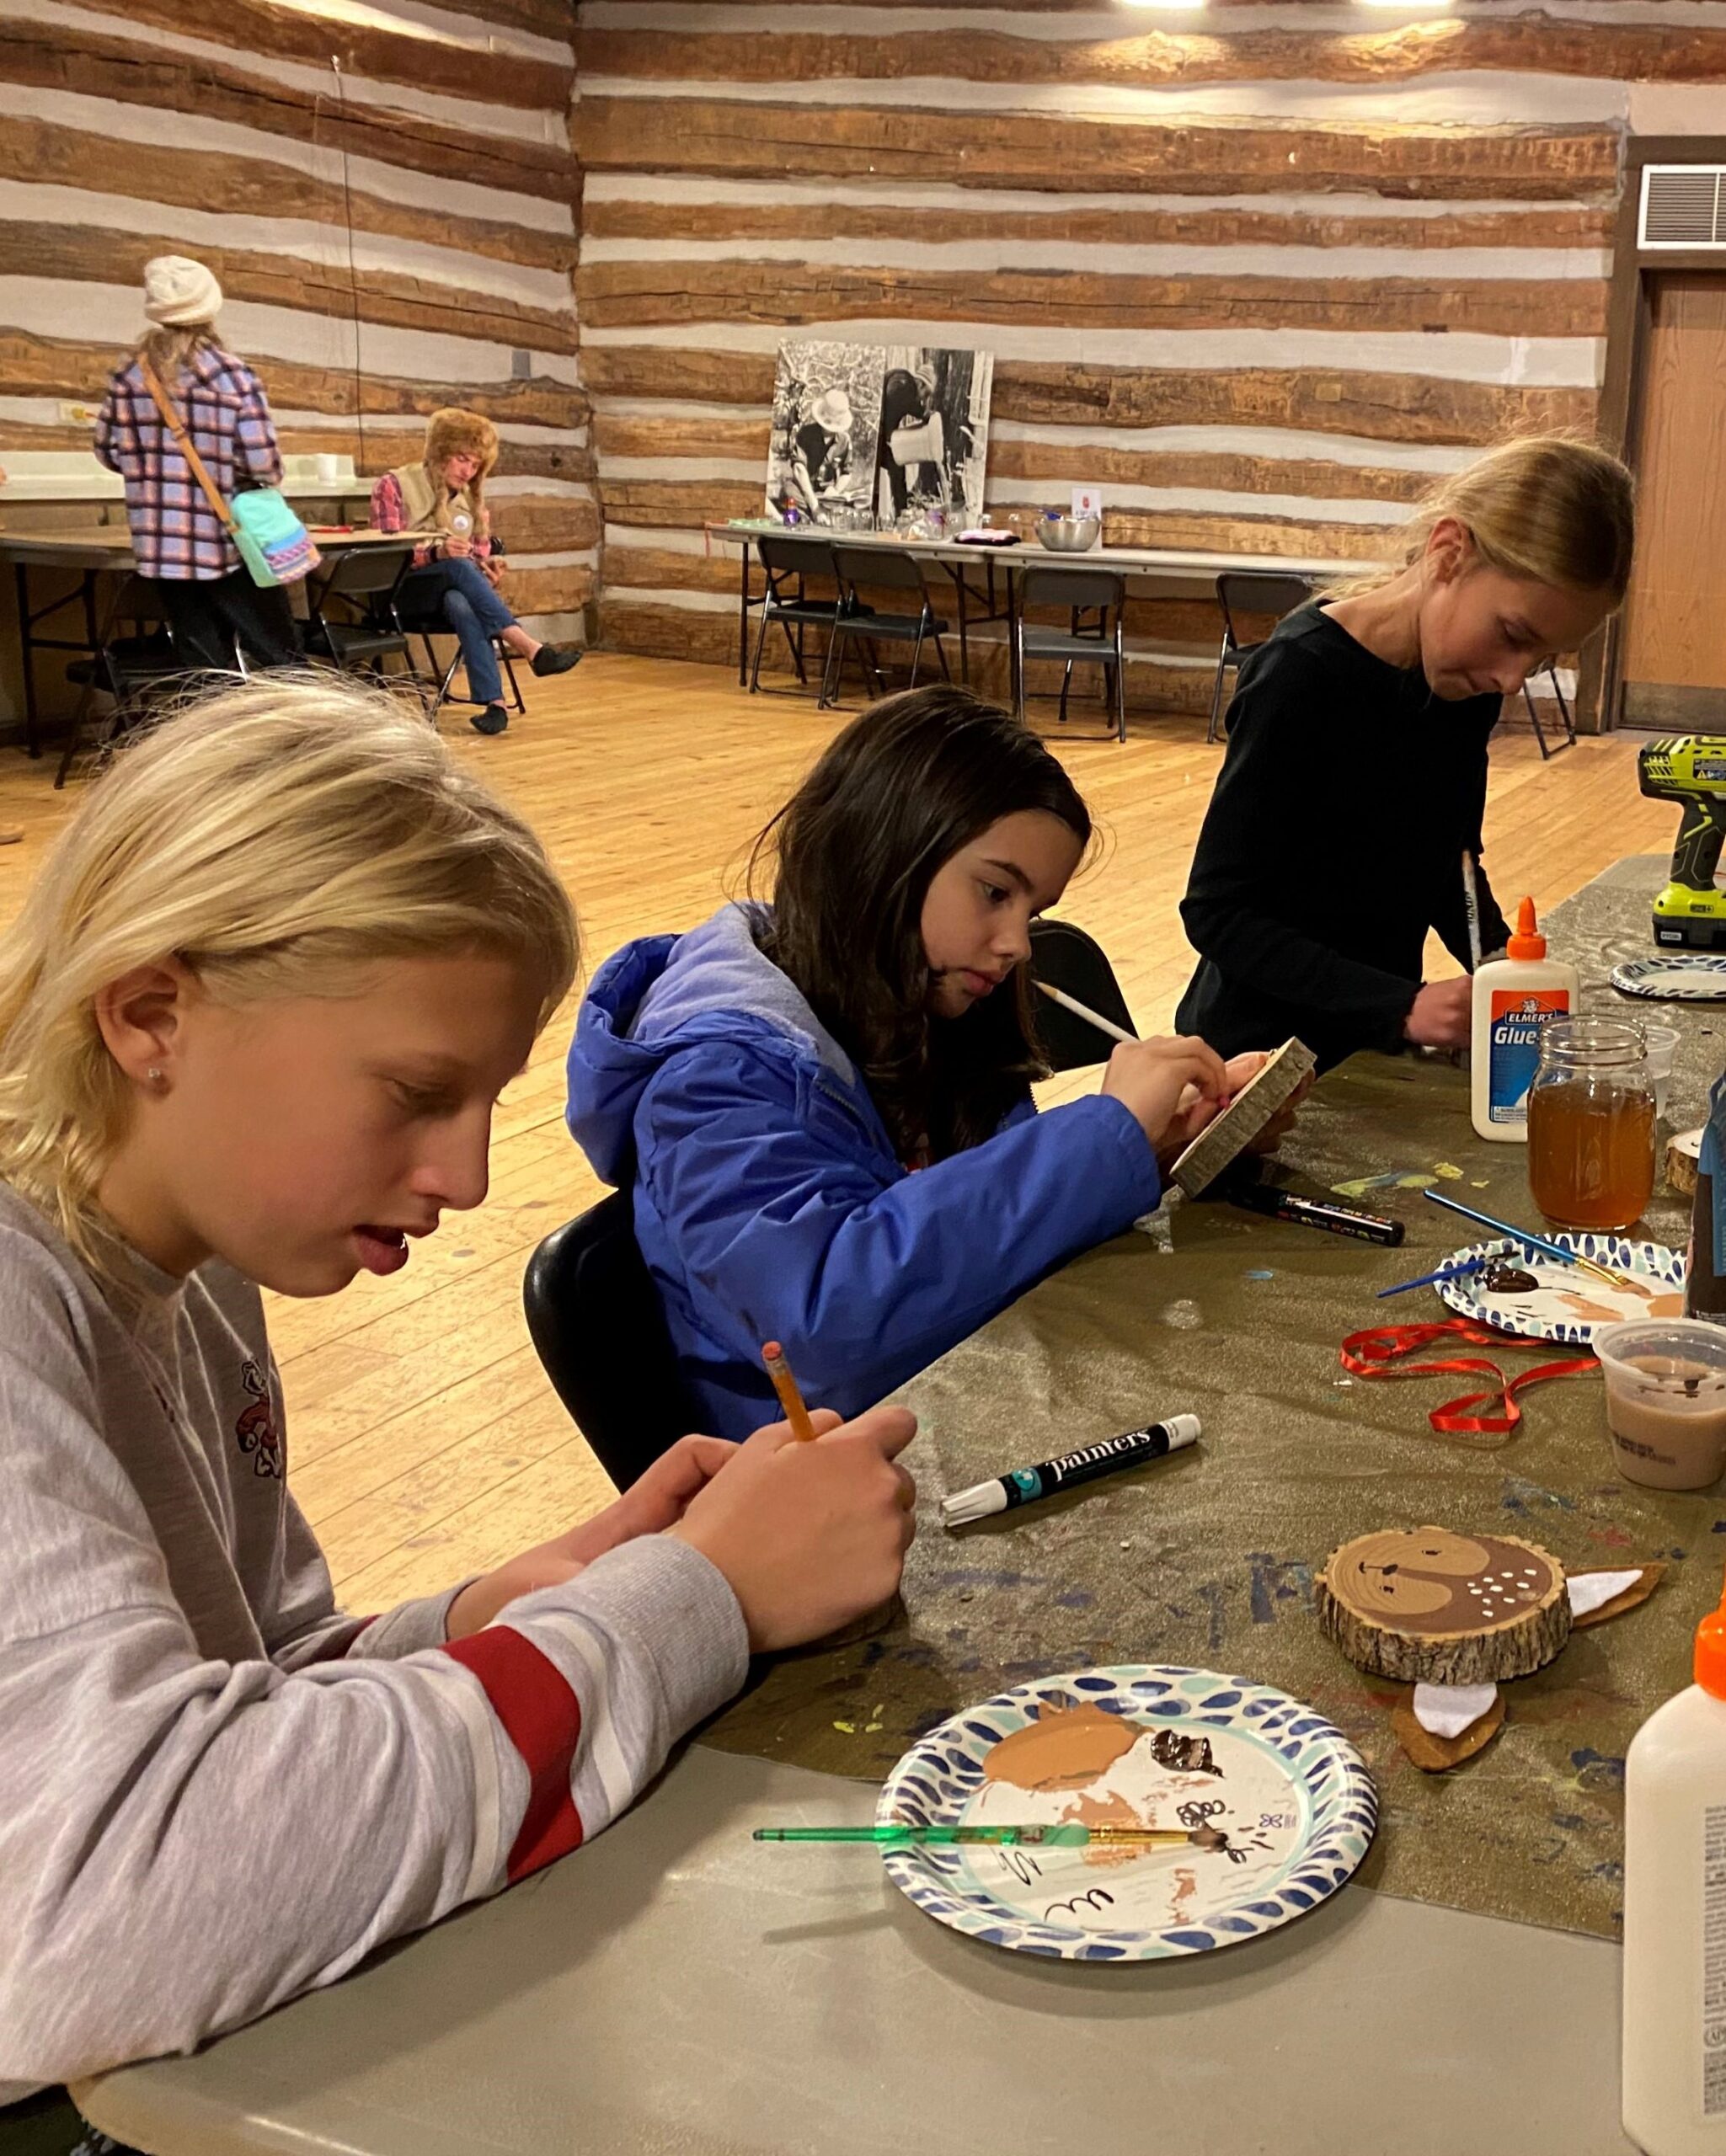 3 teens sit at a table in the Riveredge barn making crafts with wood cookies